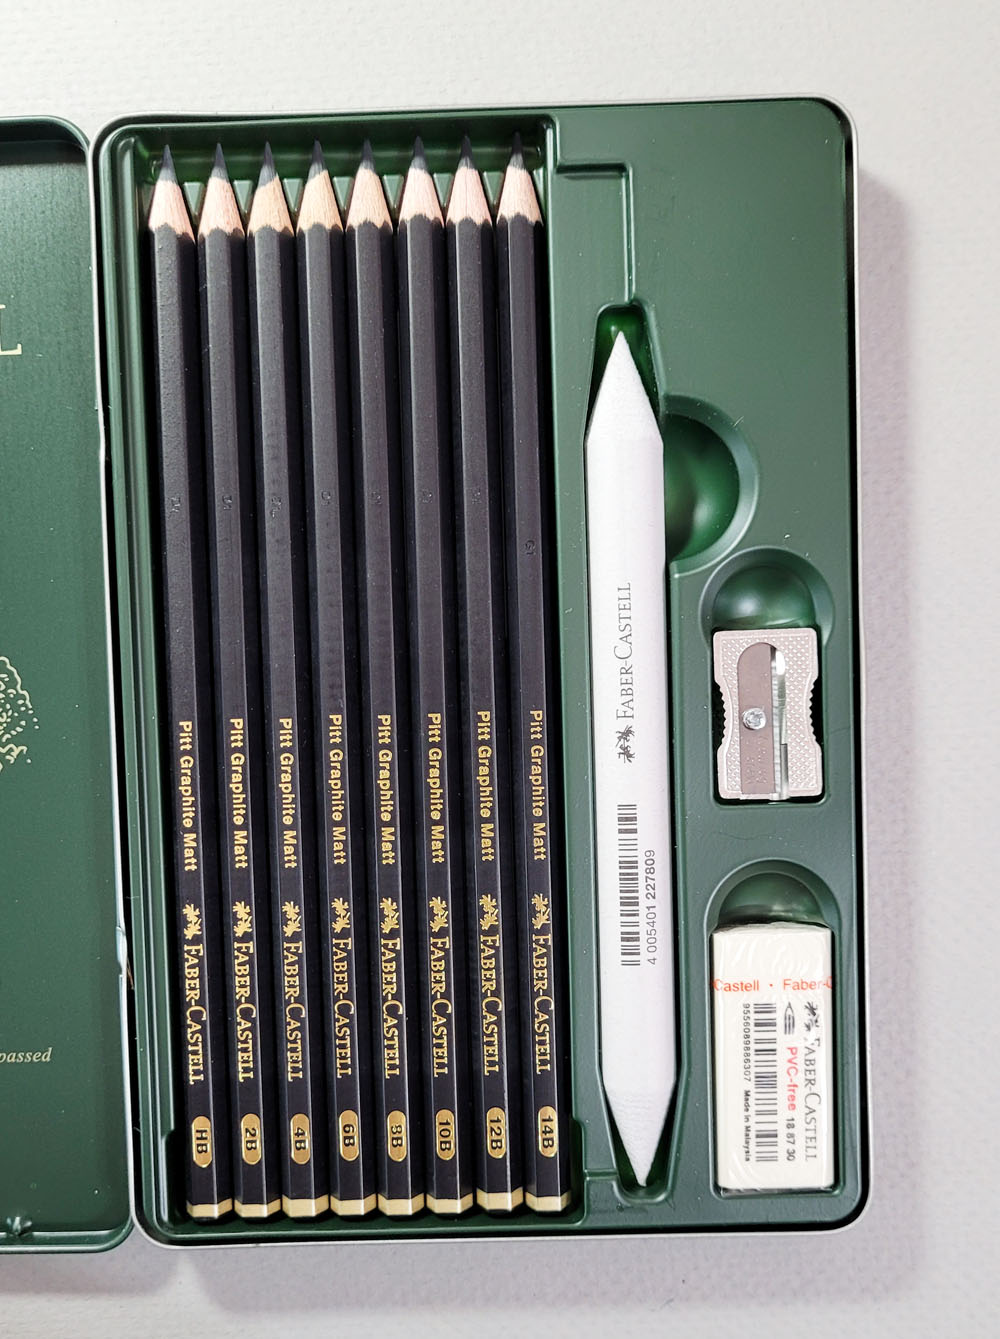 What's Inside? Faber-Castell's Graphite Sketch Set 